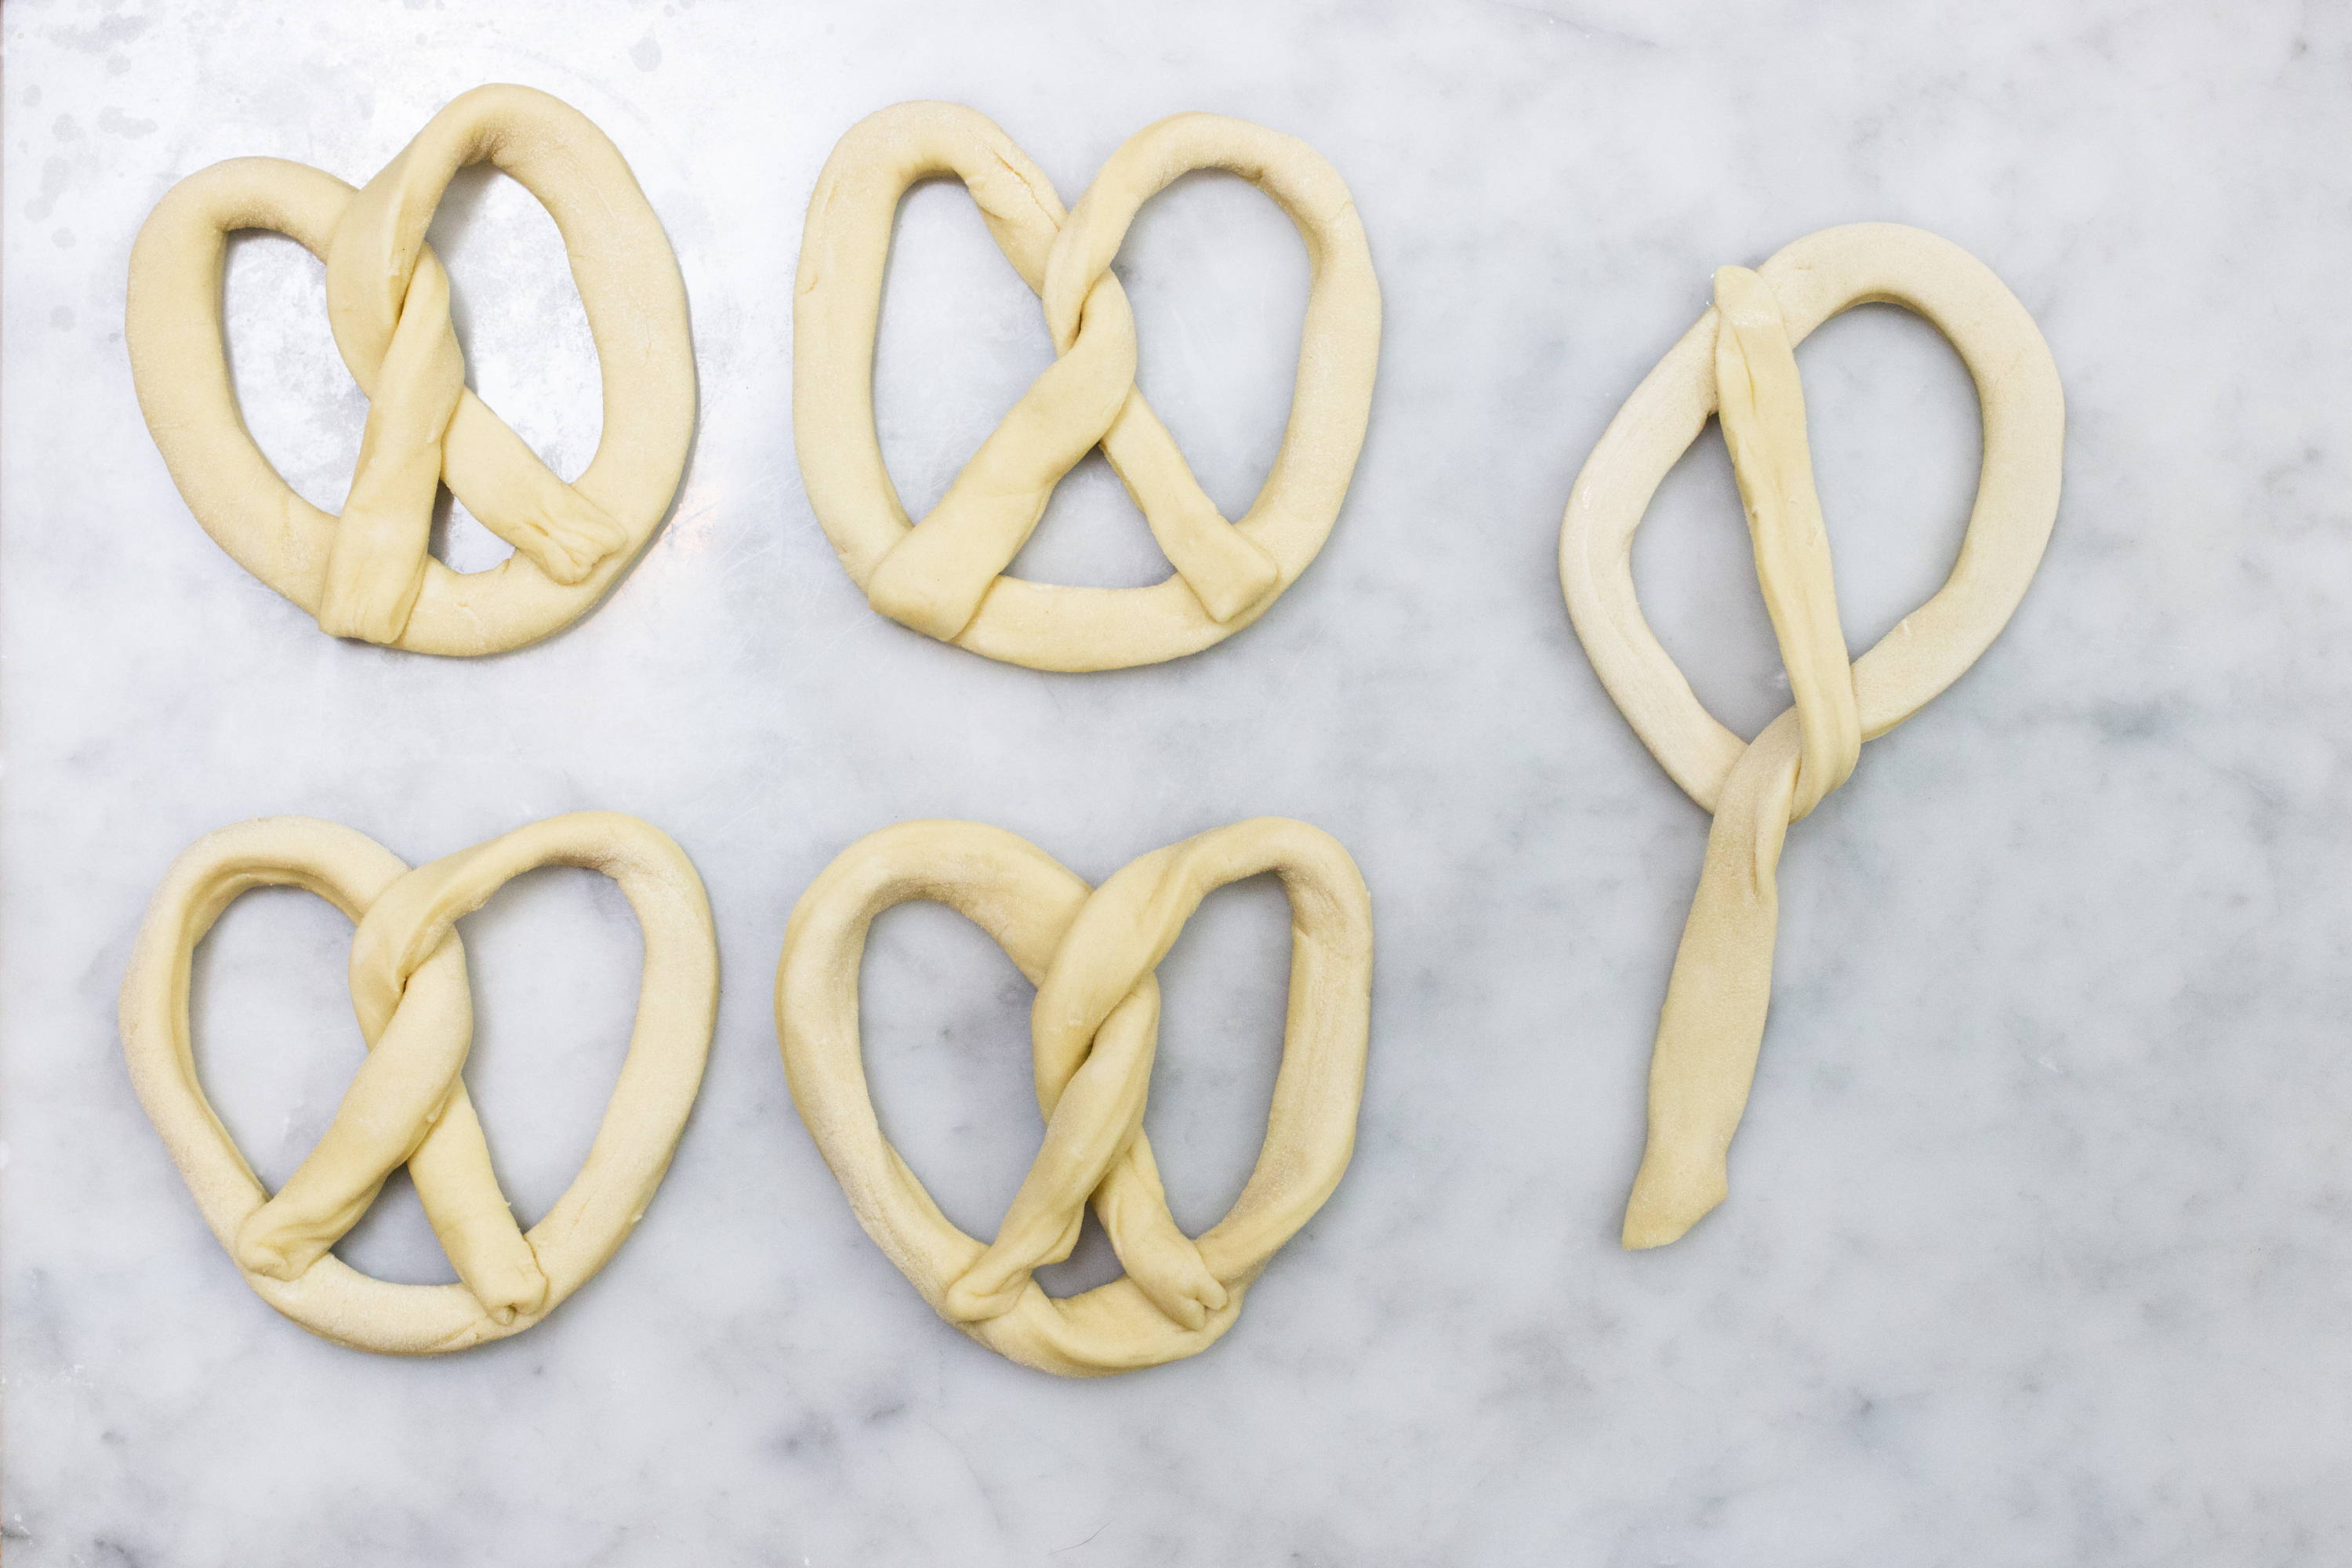 Flipping up one side - How to make pretzels